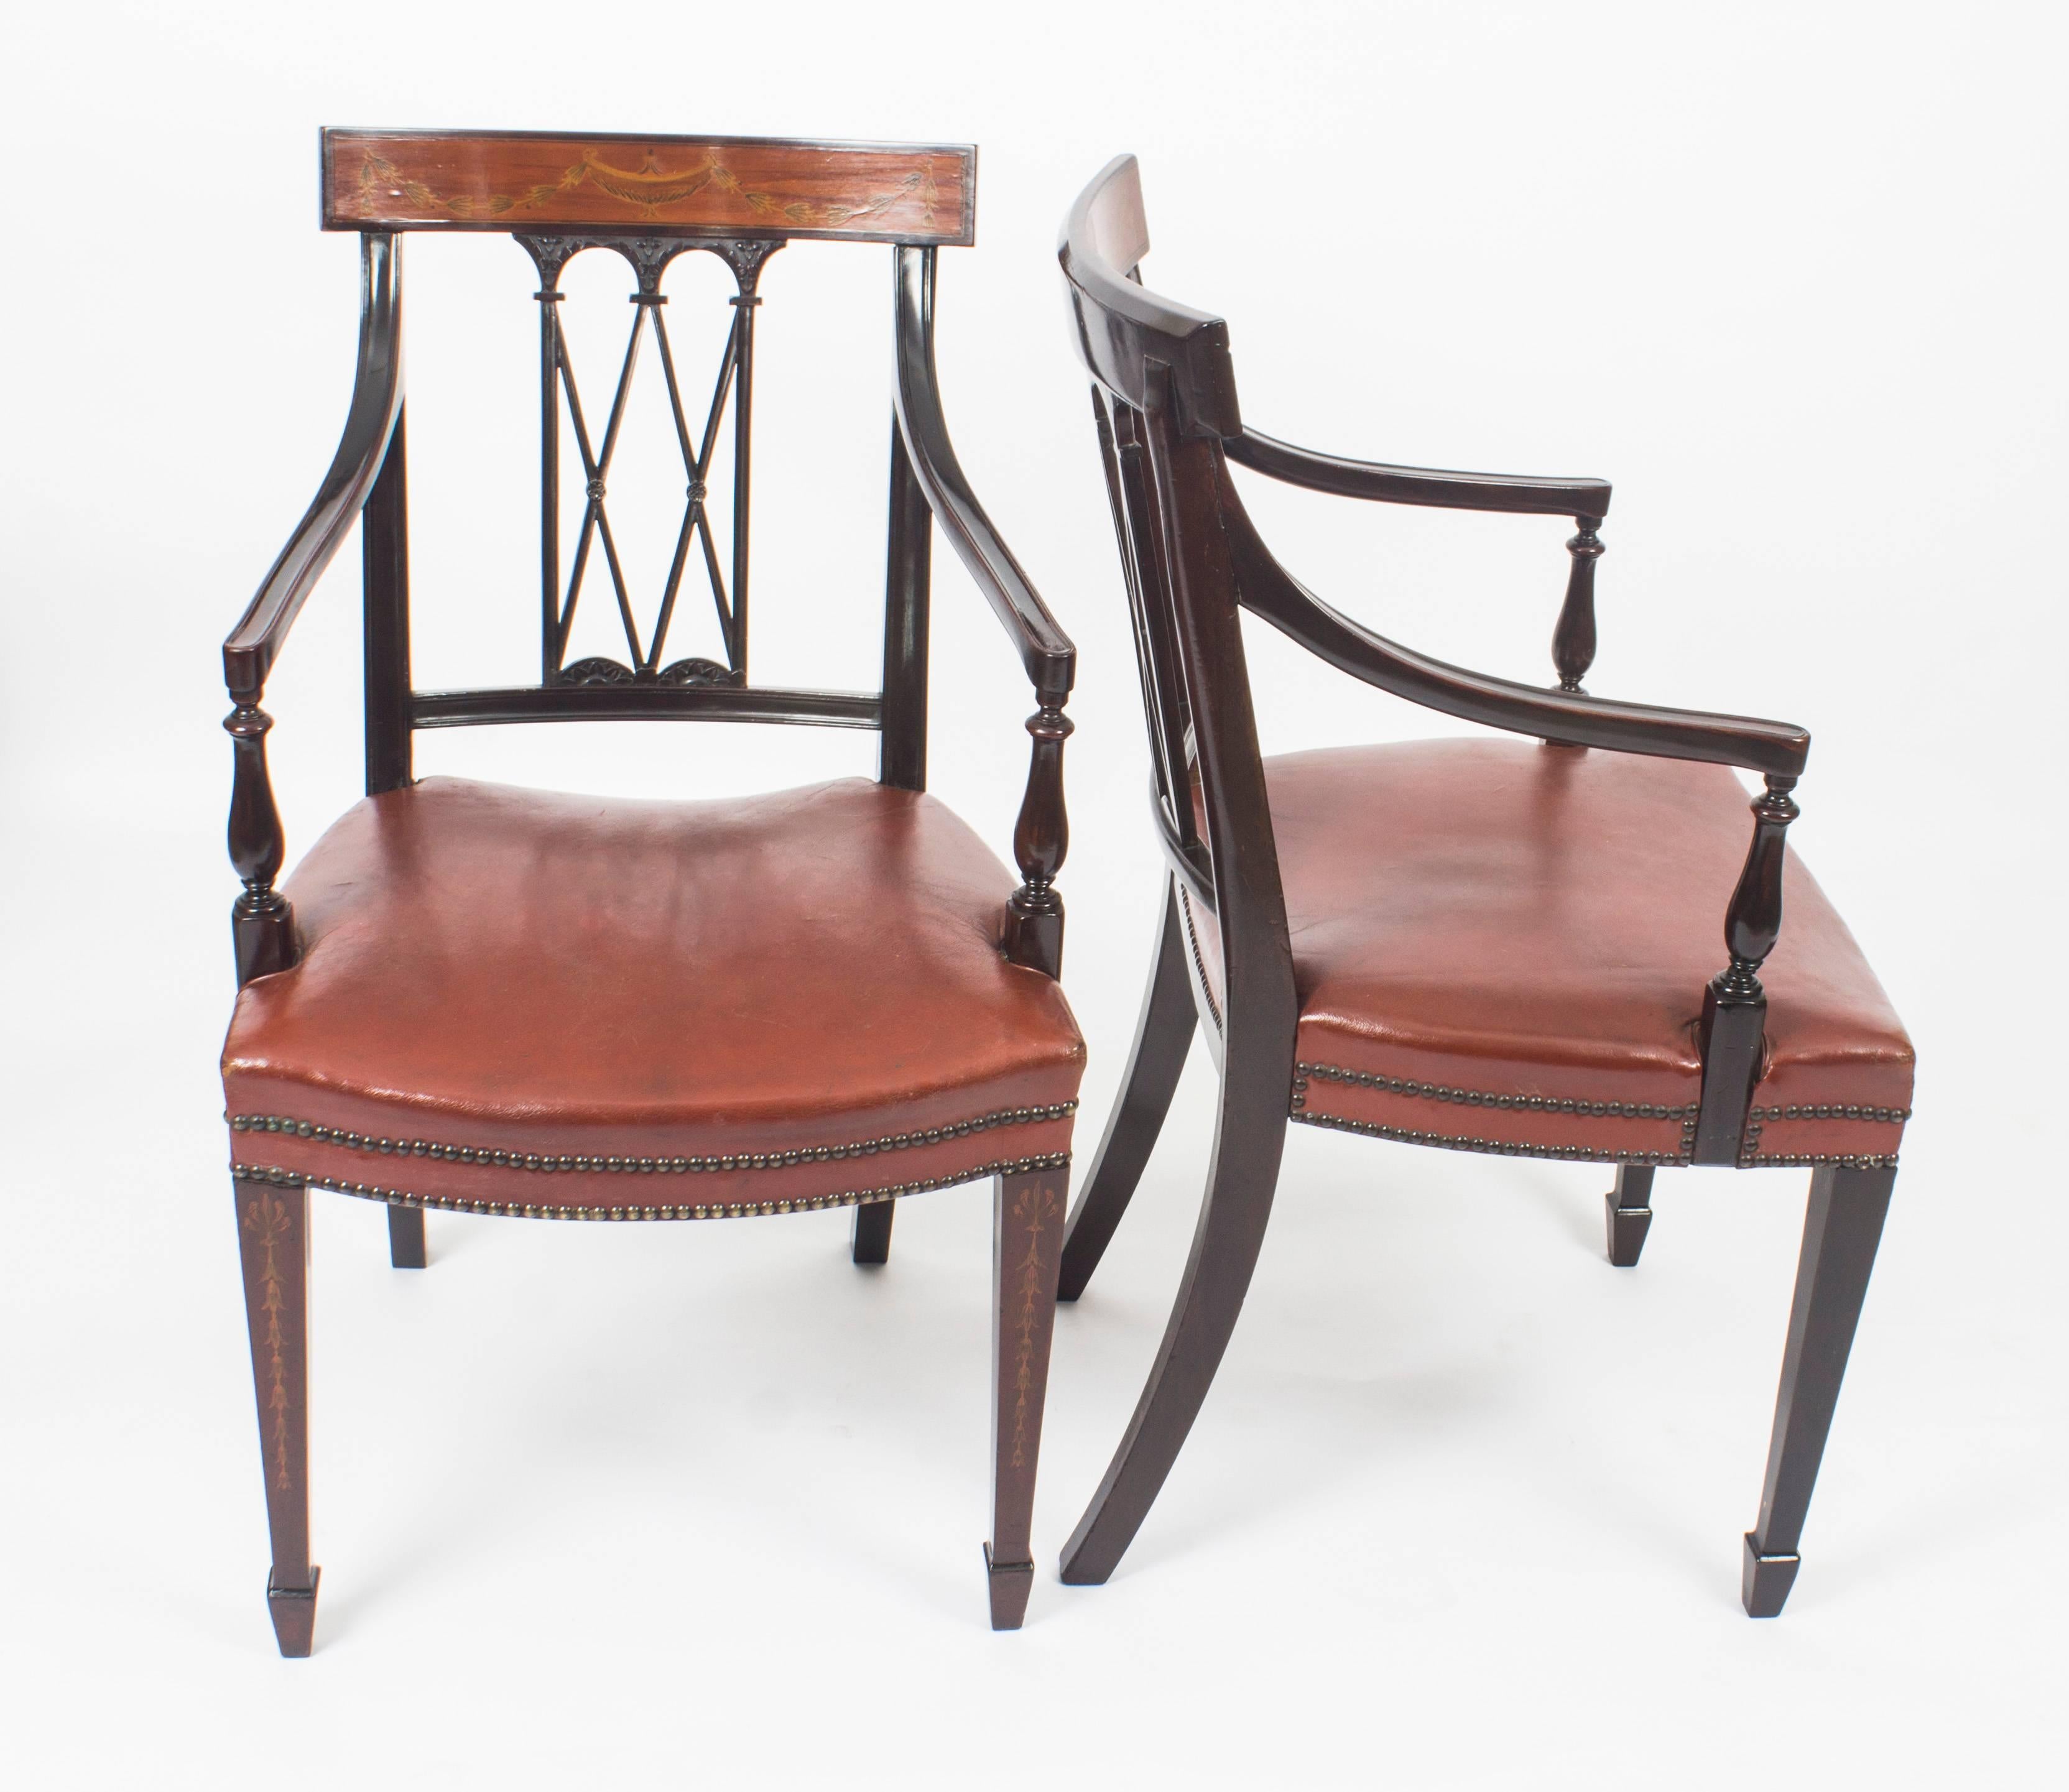 A superb and rare set of twelve late Victorian dining chairs by the renowned maker and retailer Edwards & Roberts, circa 1880 in date and comprising ten side chairs and two armchairs.

This wonderful set was accomplished in mahogany, with intricate